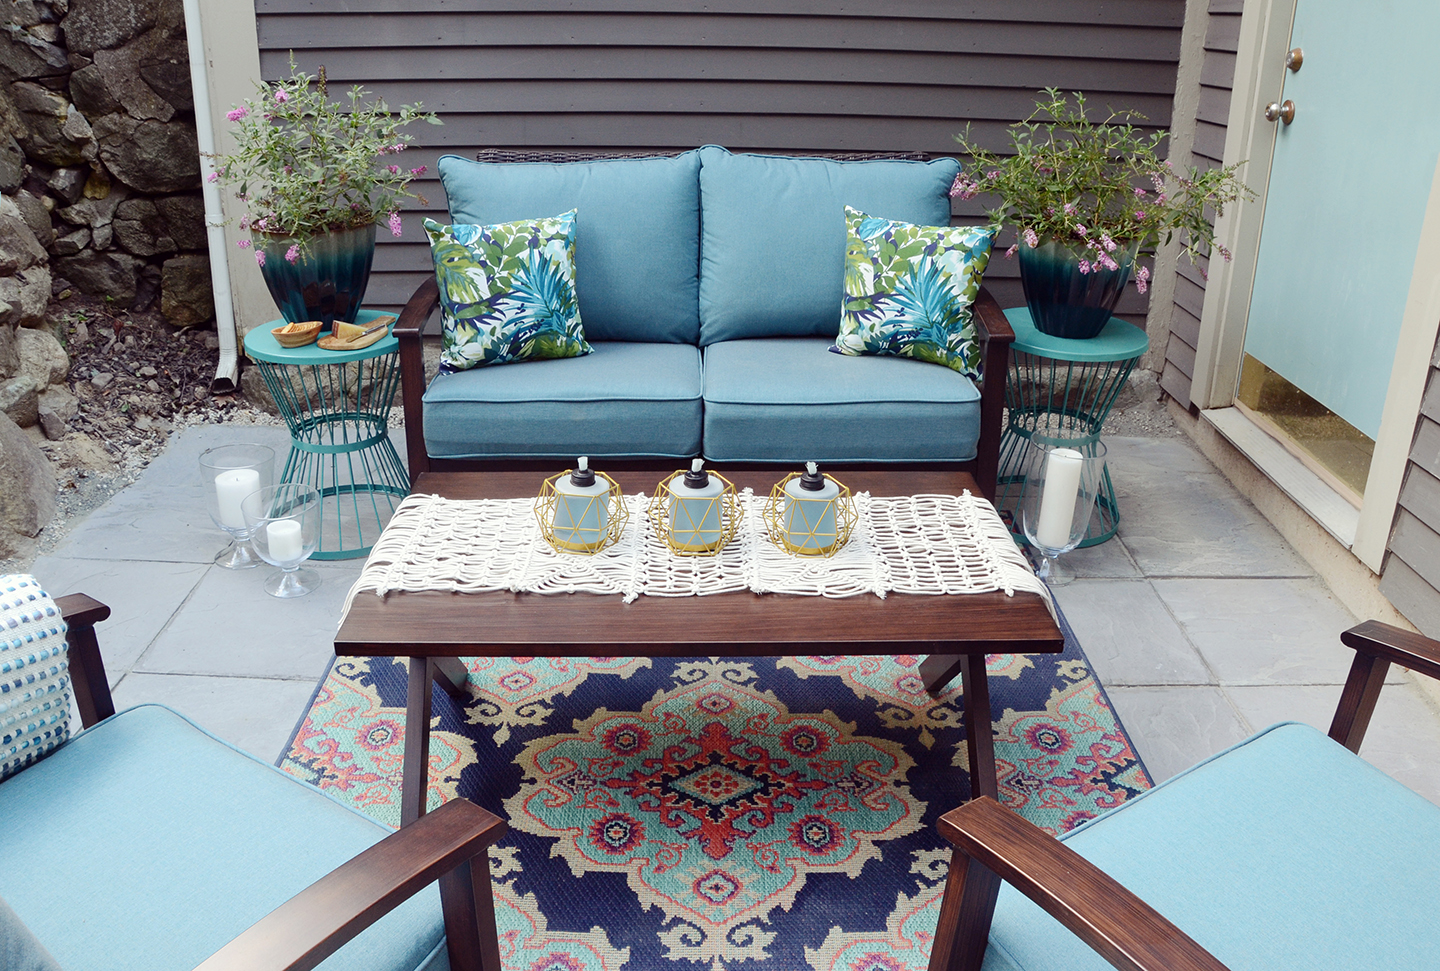 Our Budget Patio Makeover: From Patchy Grass To Chic Retreat /// By Design Fixation #patio #decor #backyard